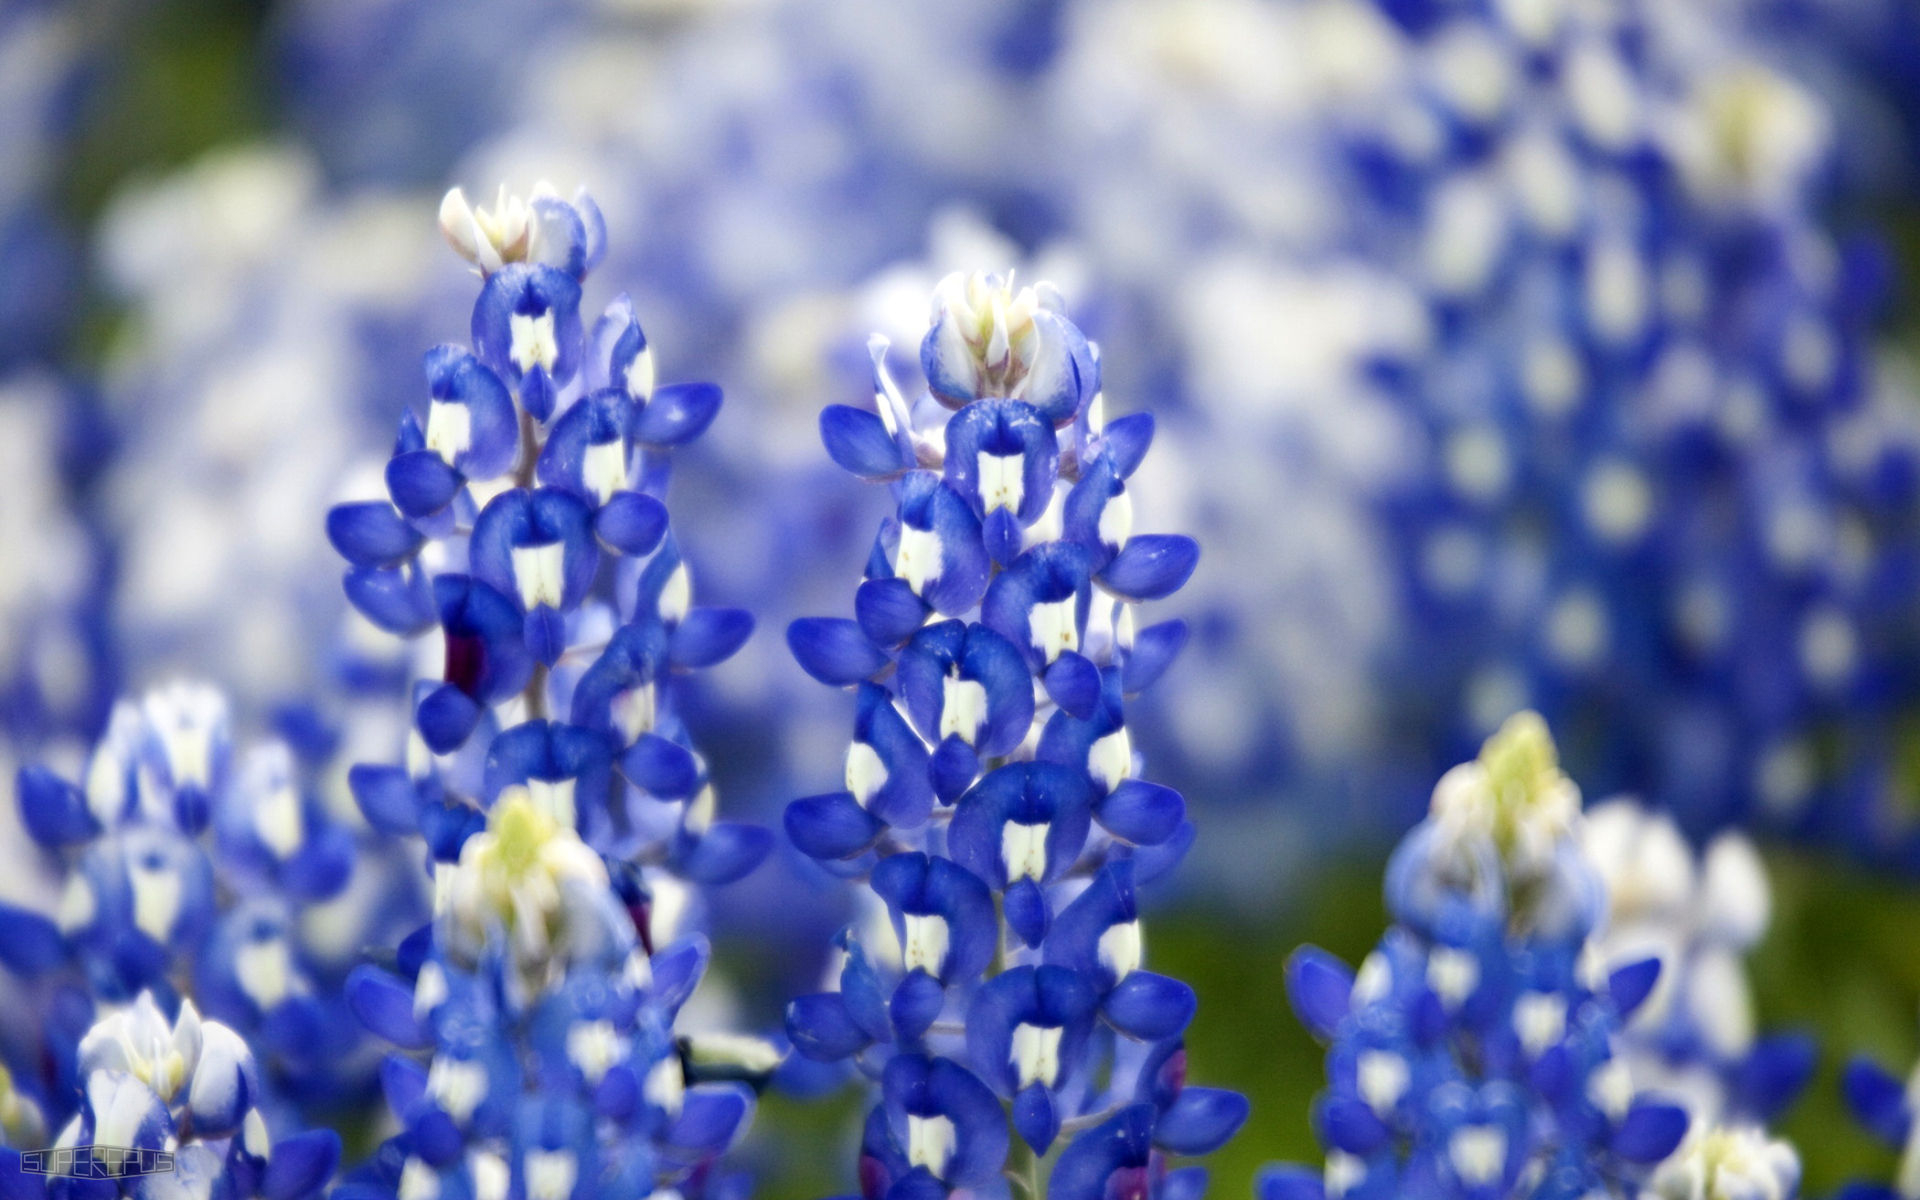 1920x1200 Free download HD Wallpaper and Desktop Background Search [] for your Desktop, Mobile \u0026 Tablet | Explore 41+ Picture of Bluebonnets for Wallpaper | Bluebonnet Wallpaper, Bluebonnet Wallpaper Desktop High Resolution, Bluebonnet Wallpaper Desktop